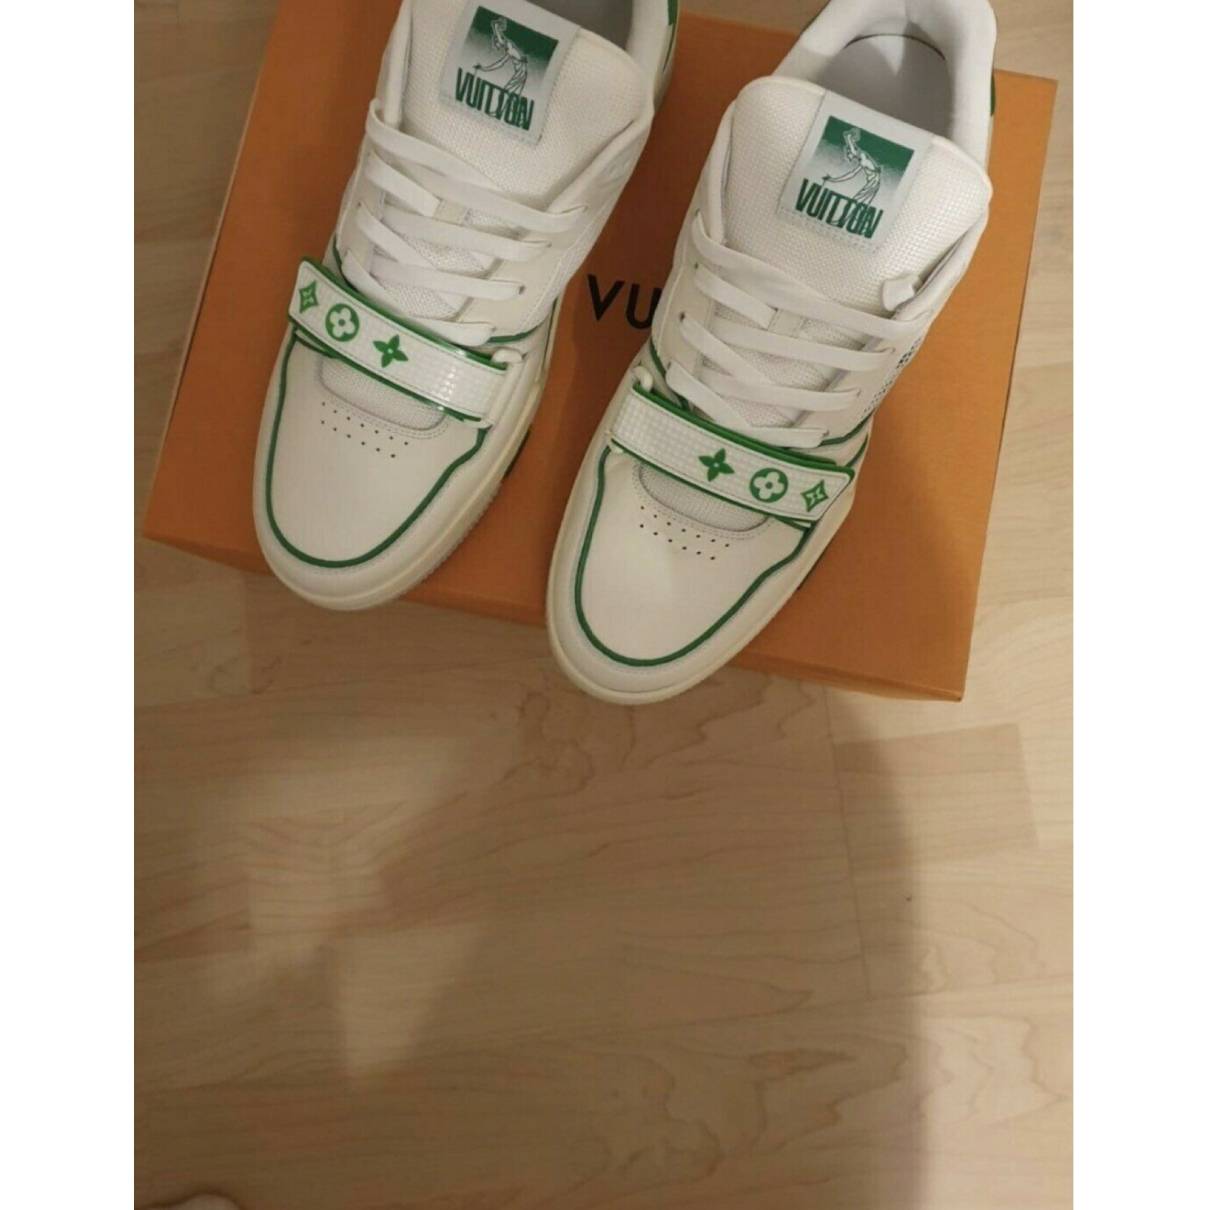 Louis Vuitton SS19 LV Trainer Green / White size LV 9 (UK 9)